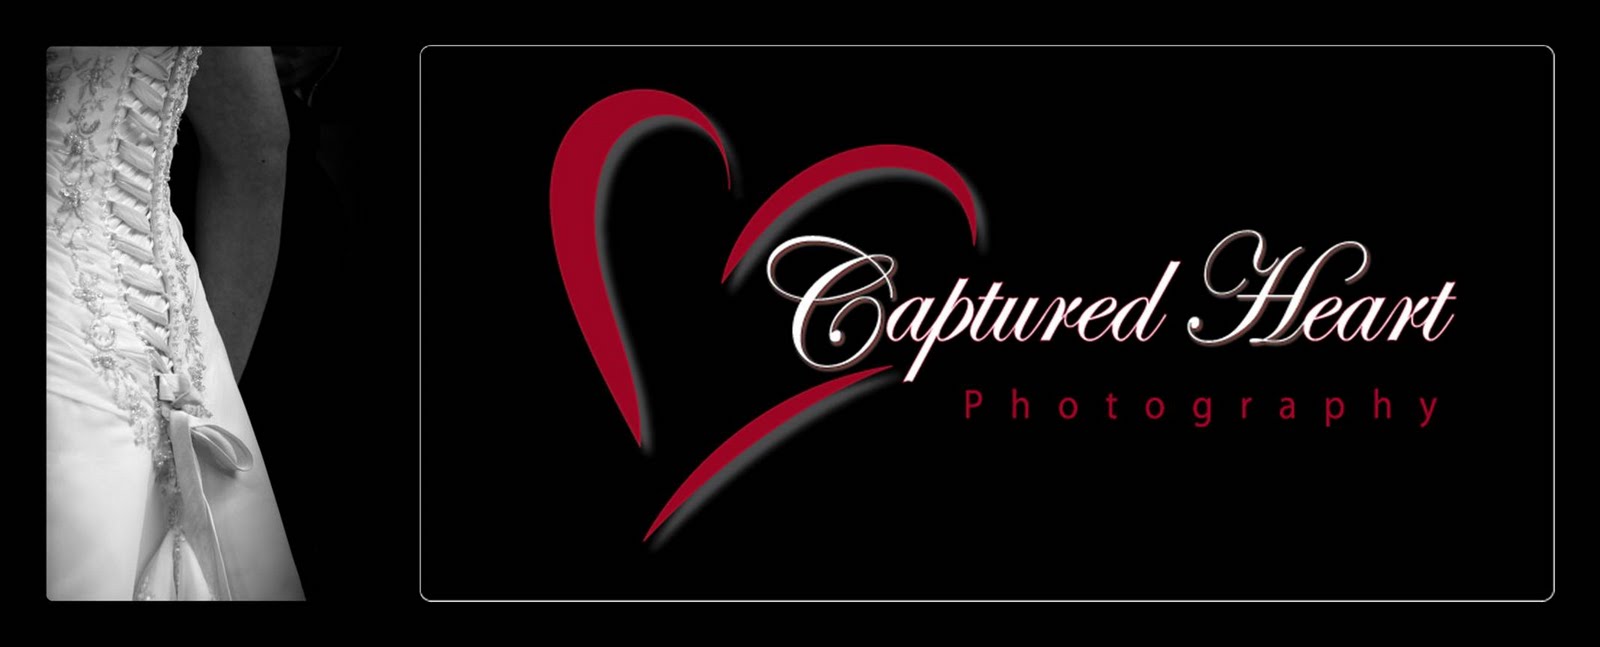 CAPTURED HEART PHOTOGRAPHY